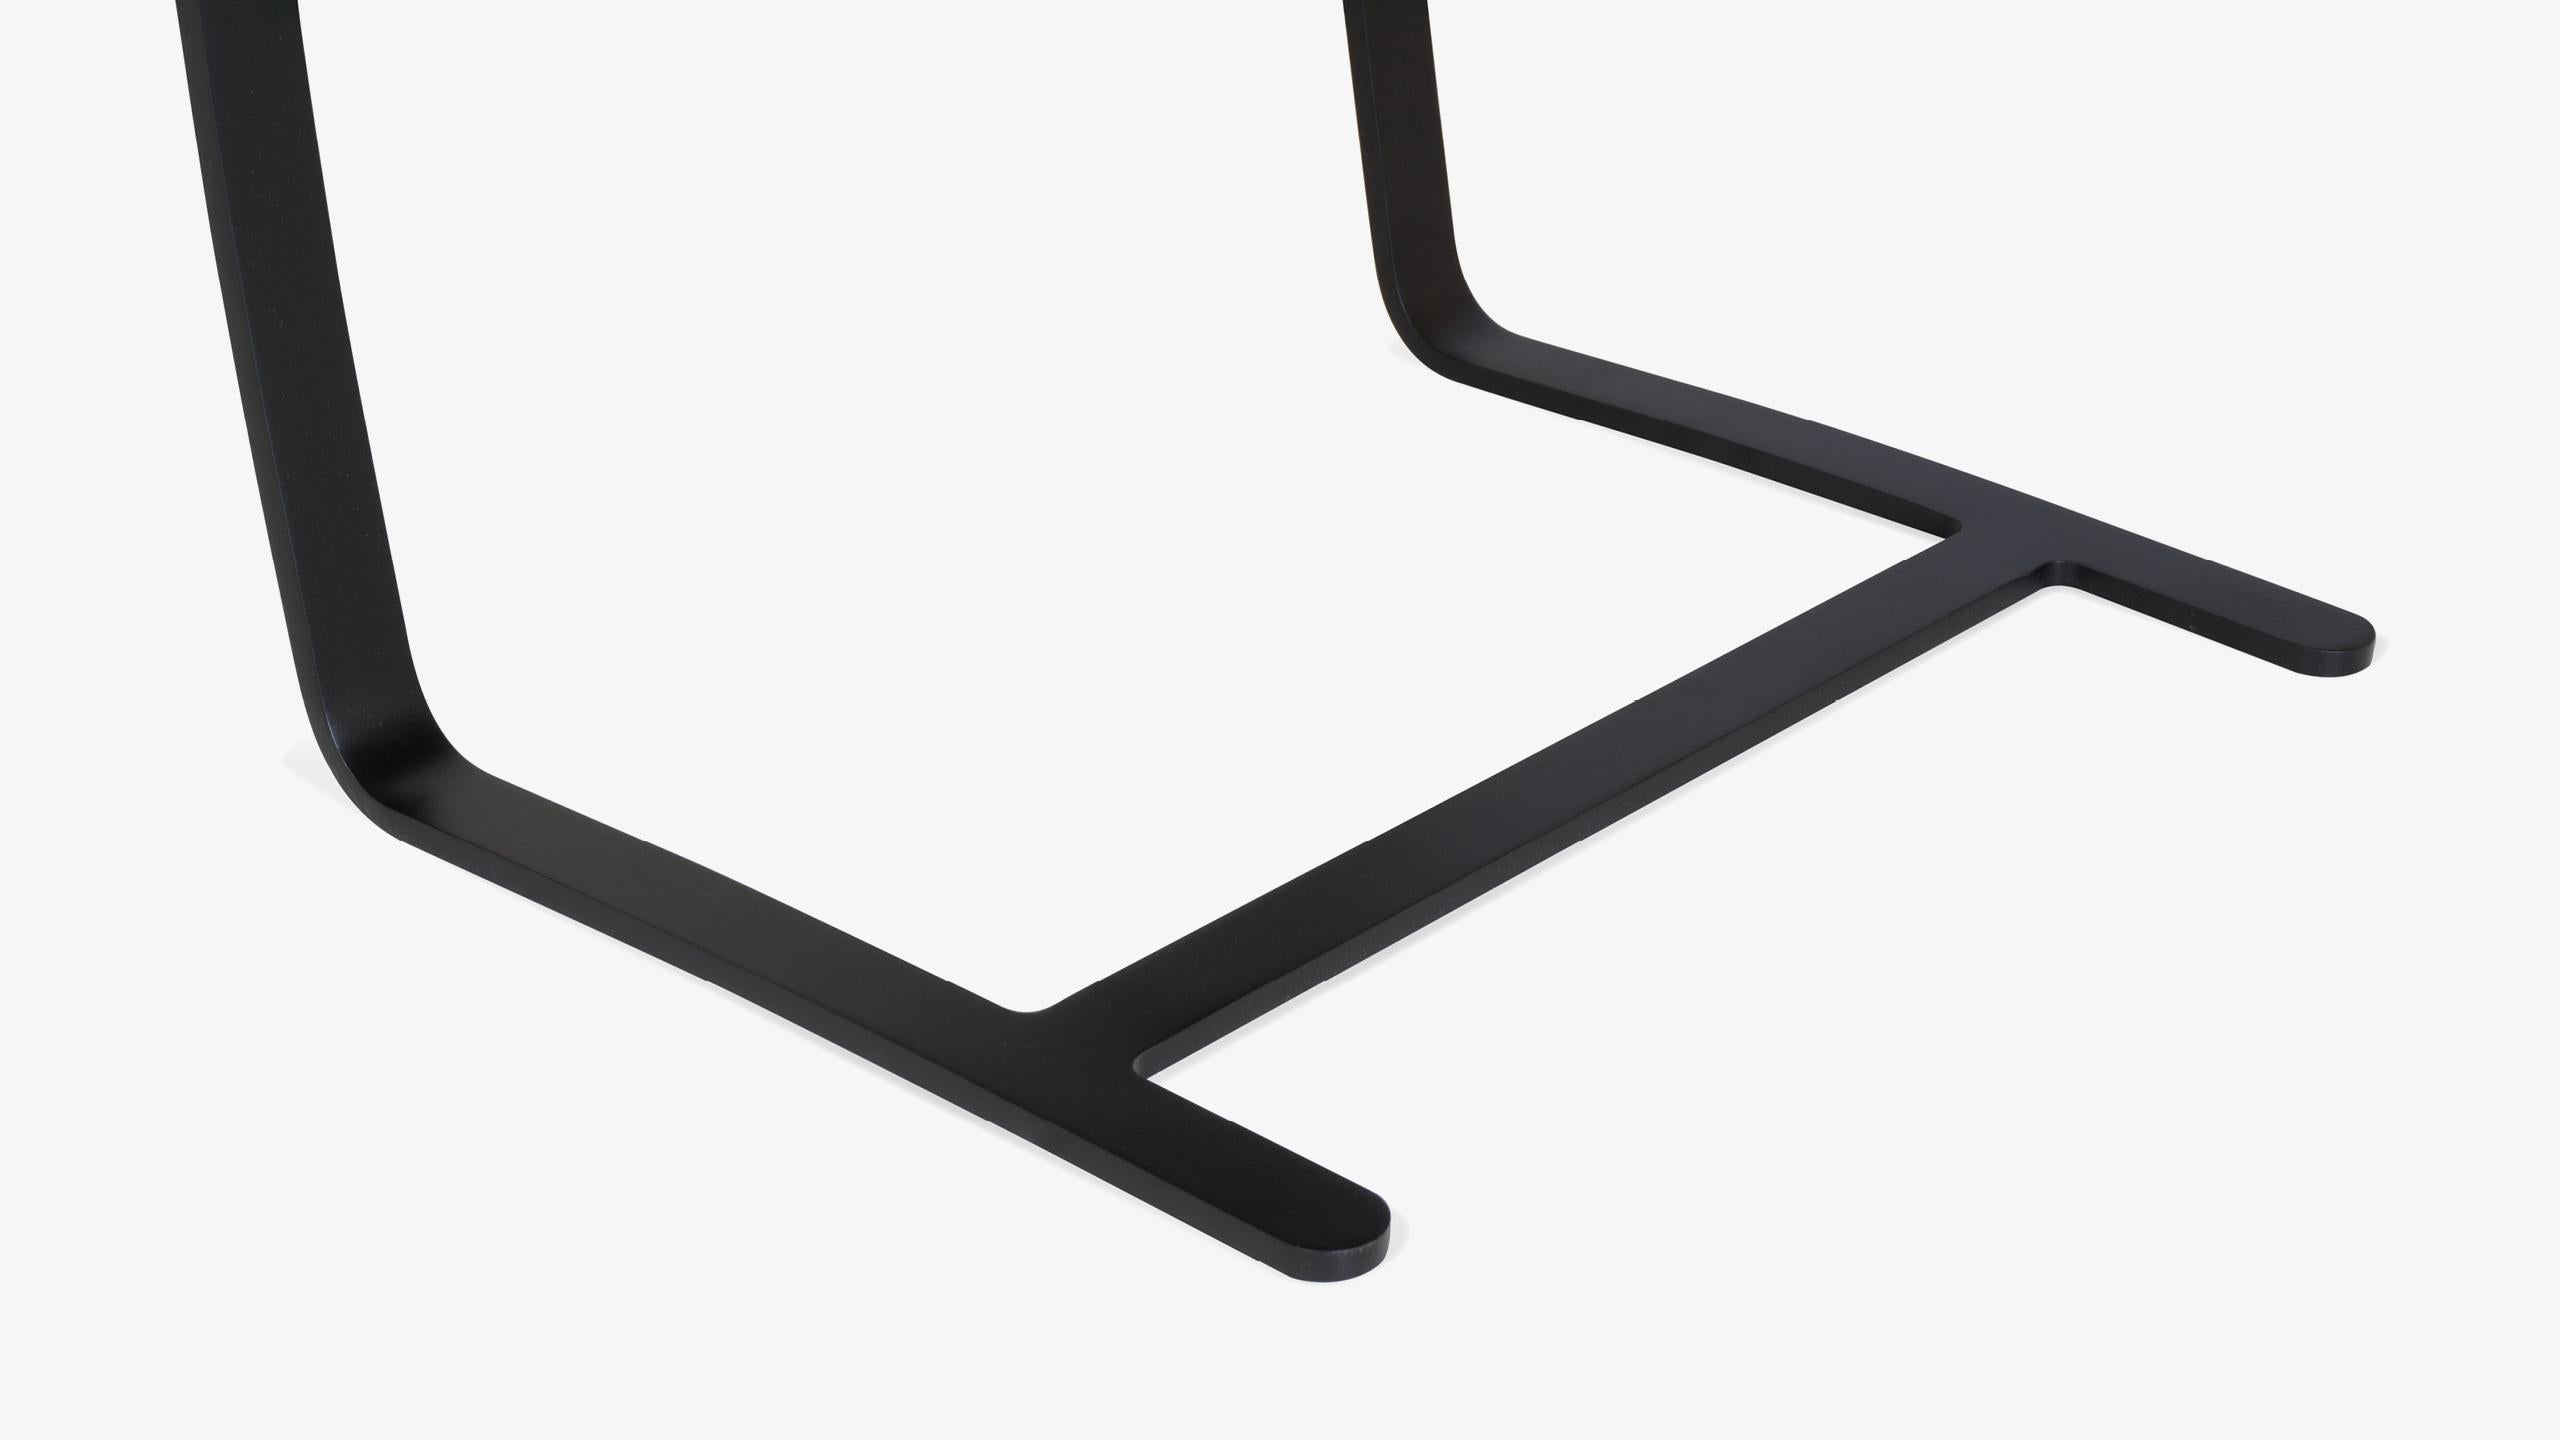 Brno Flat-Bar Chairs Velvet, Obsidian Matte by Mies van der Rohe for Knoll, 6 1